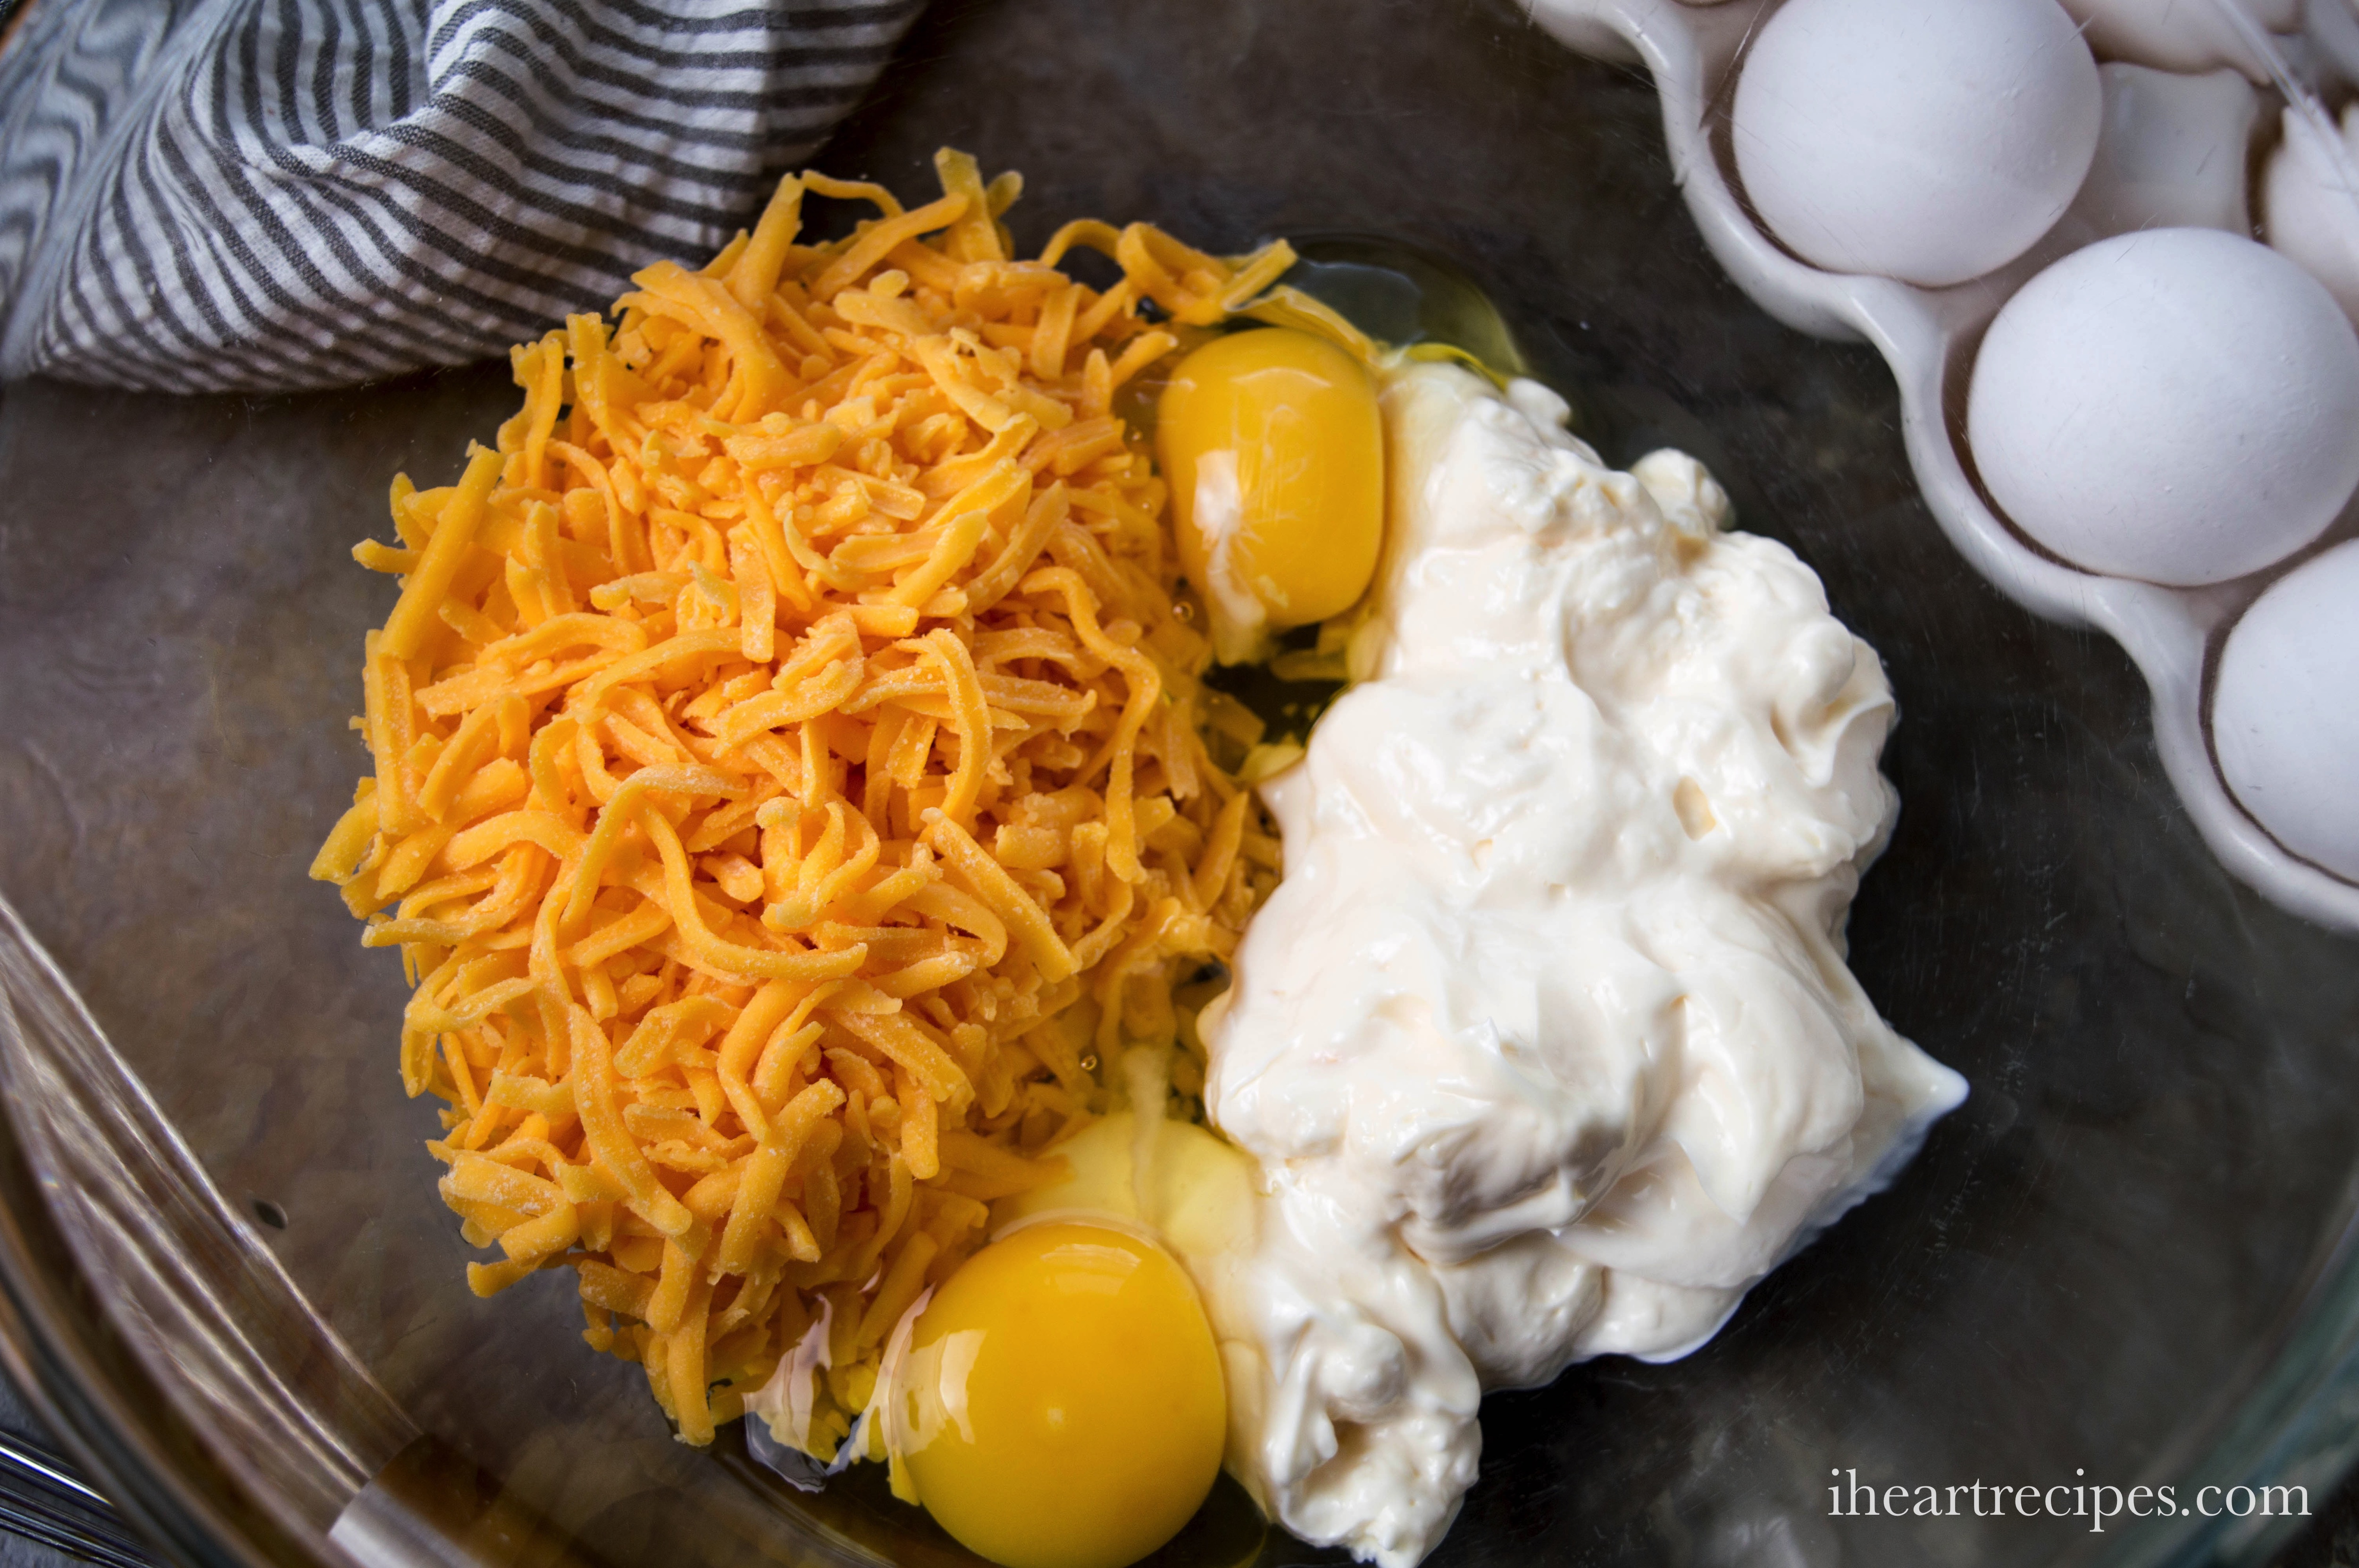 Mayonnaise, two eggs, and shredded cheese in a clear glass bowl. A carton of eggs sits next to the bowl on the brown countertop.